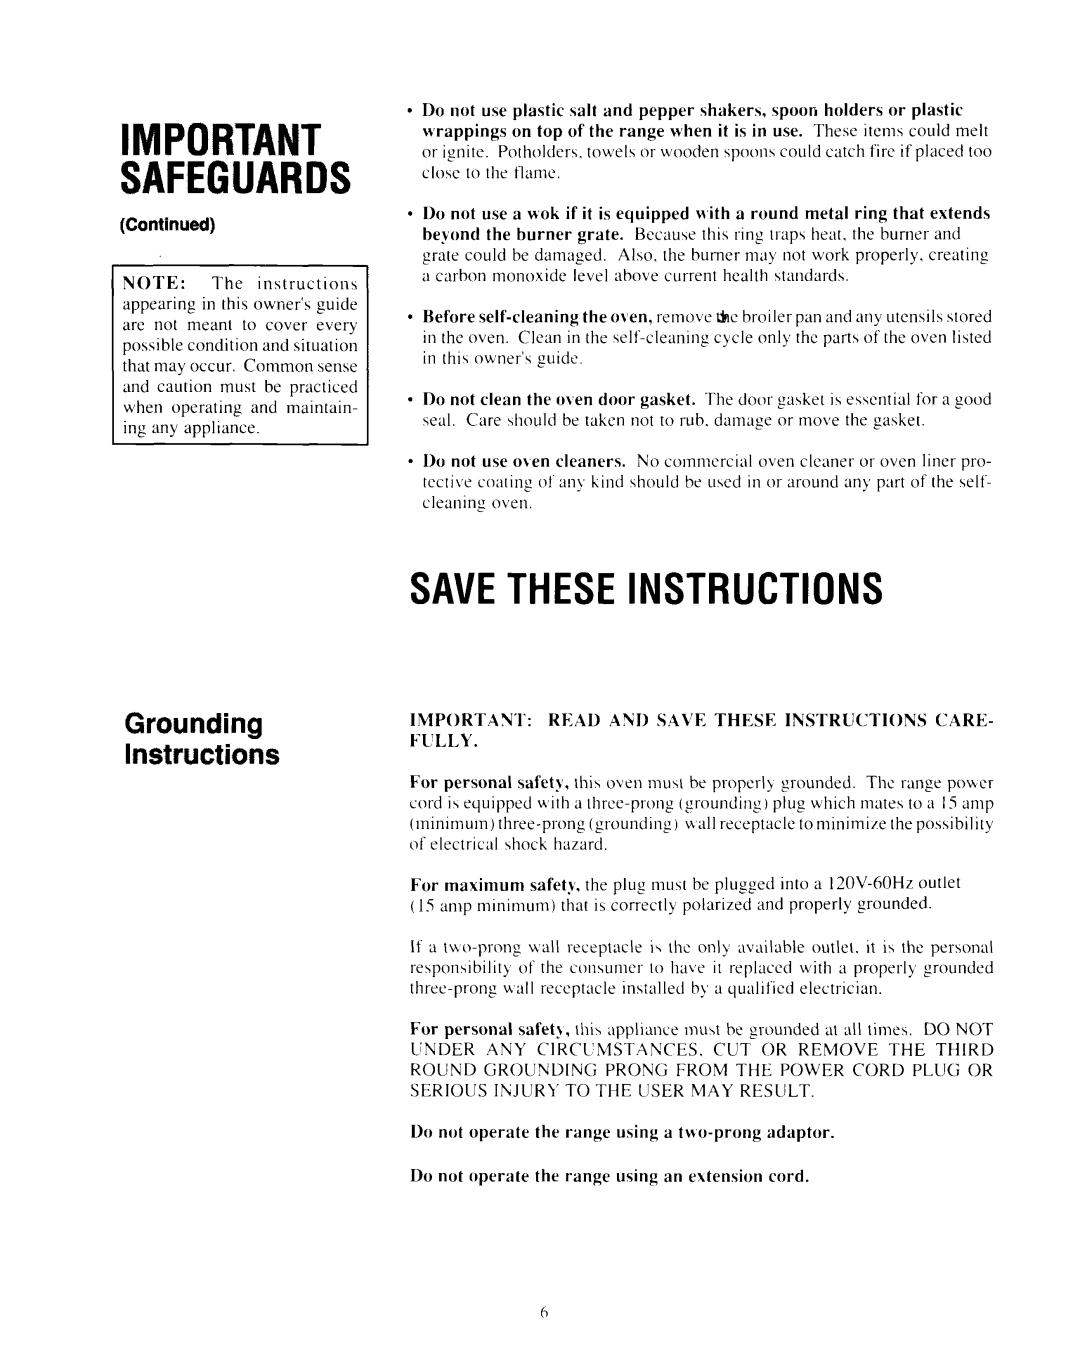 Whirlpool SF365BEXN0 manual Grounding Instructions, Savetheseinstructions, Important Safeguards 